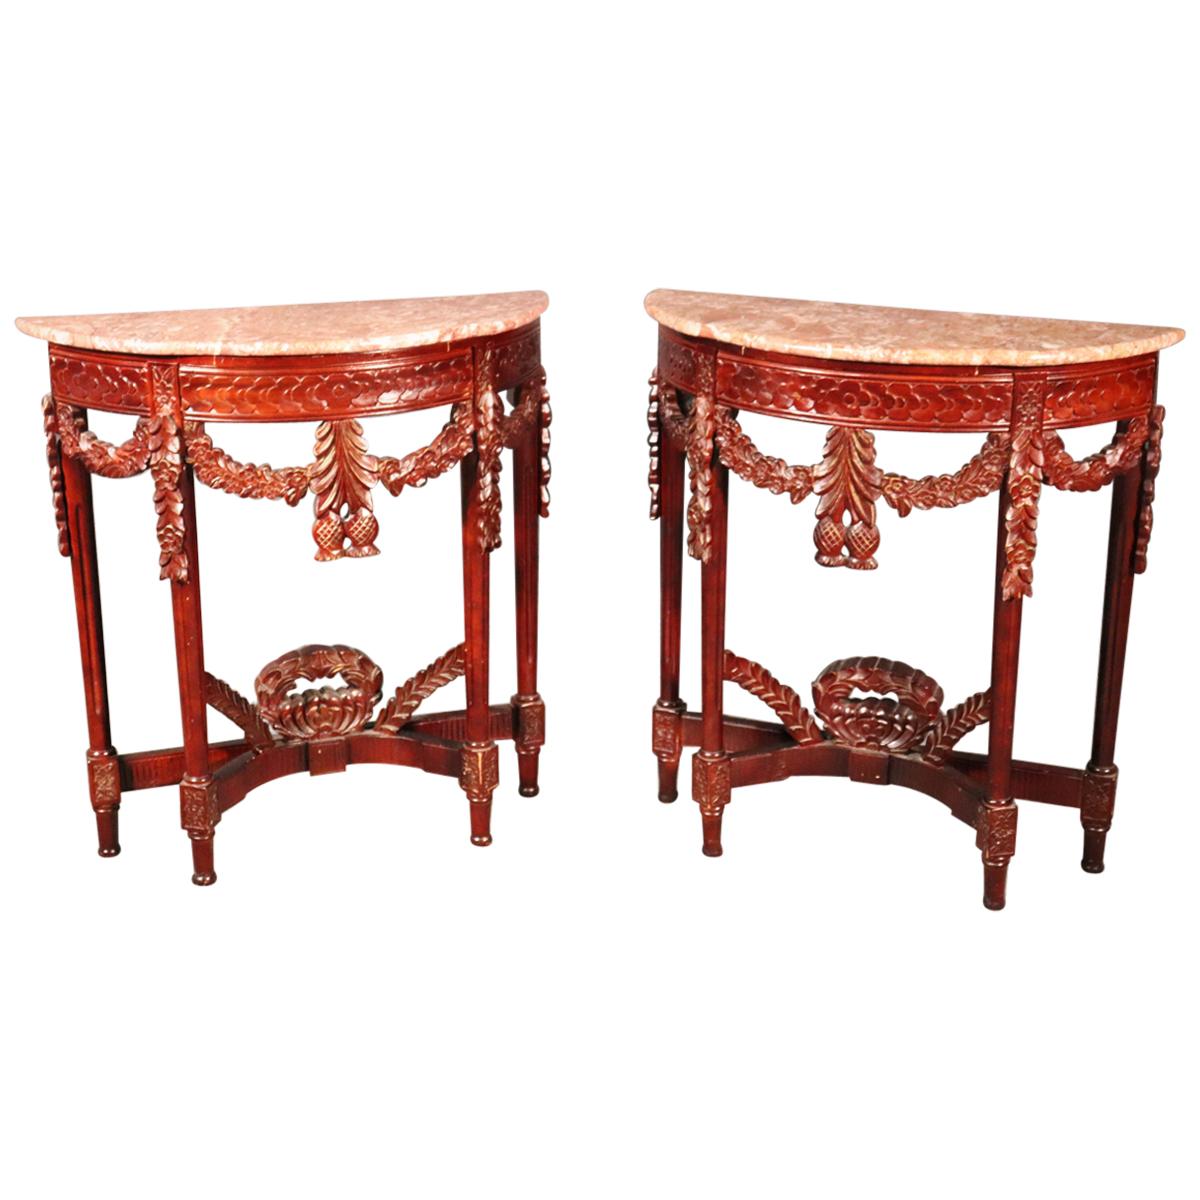 Pair of Carved Mahogany Marble-Top Petite Demilune Console Tables